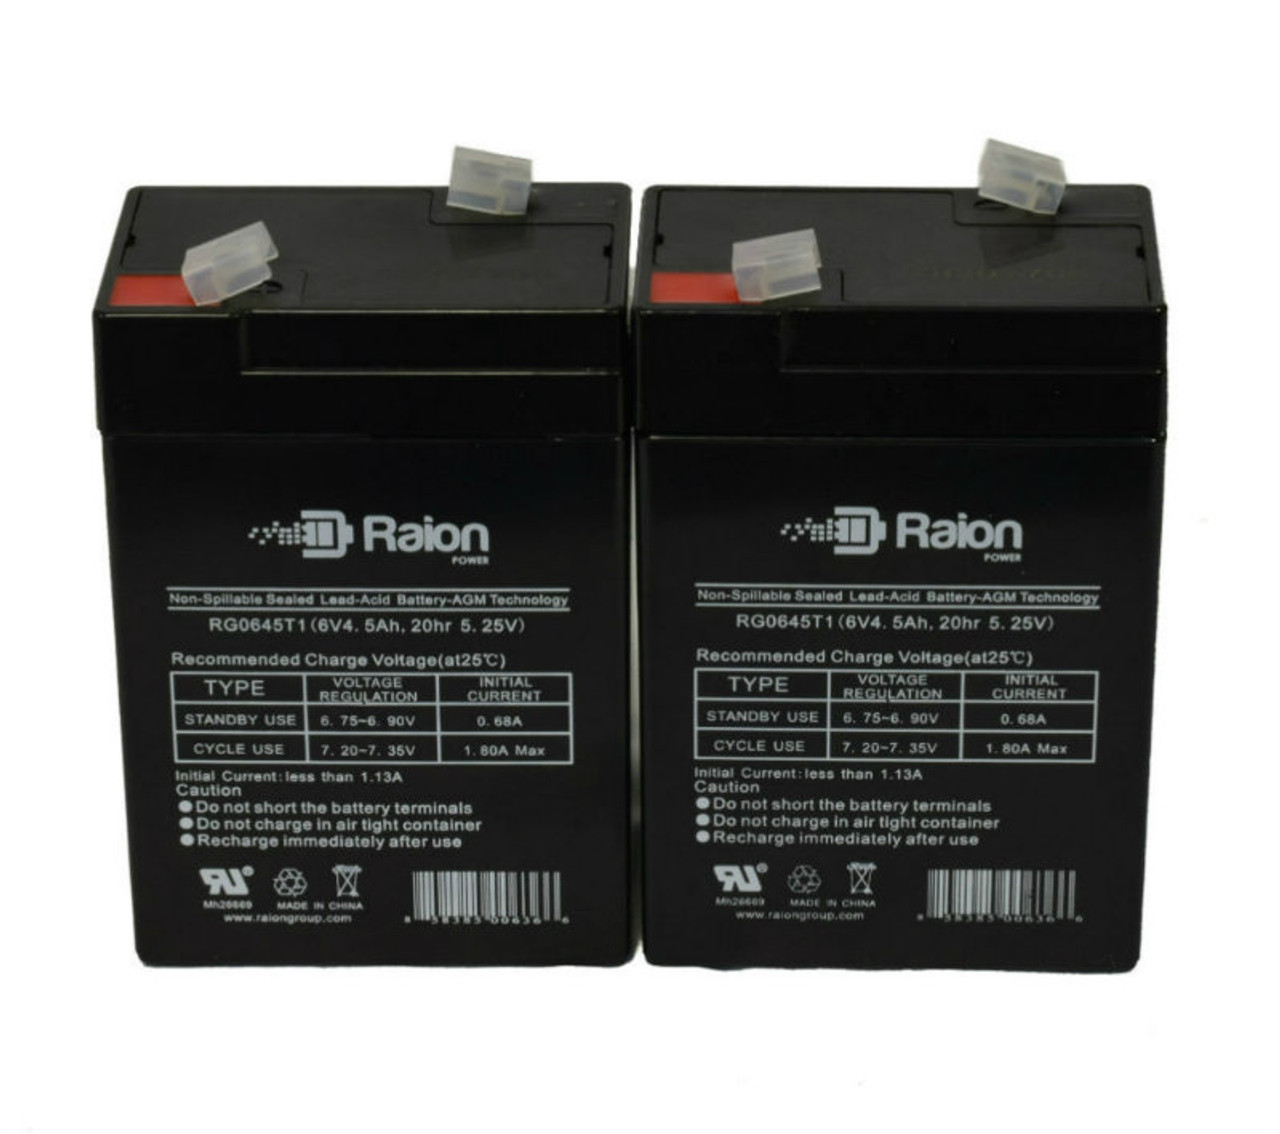 Raion Power 6 Volt 4.5Ah RG0645T1 Replacement Battery for MHB MS4.5-6 - 2 Pack